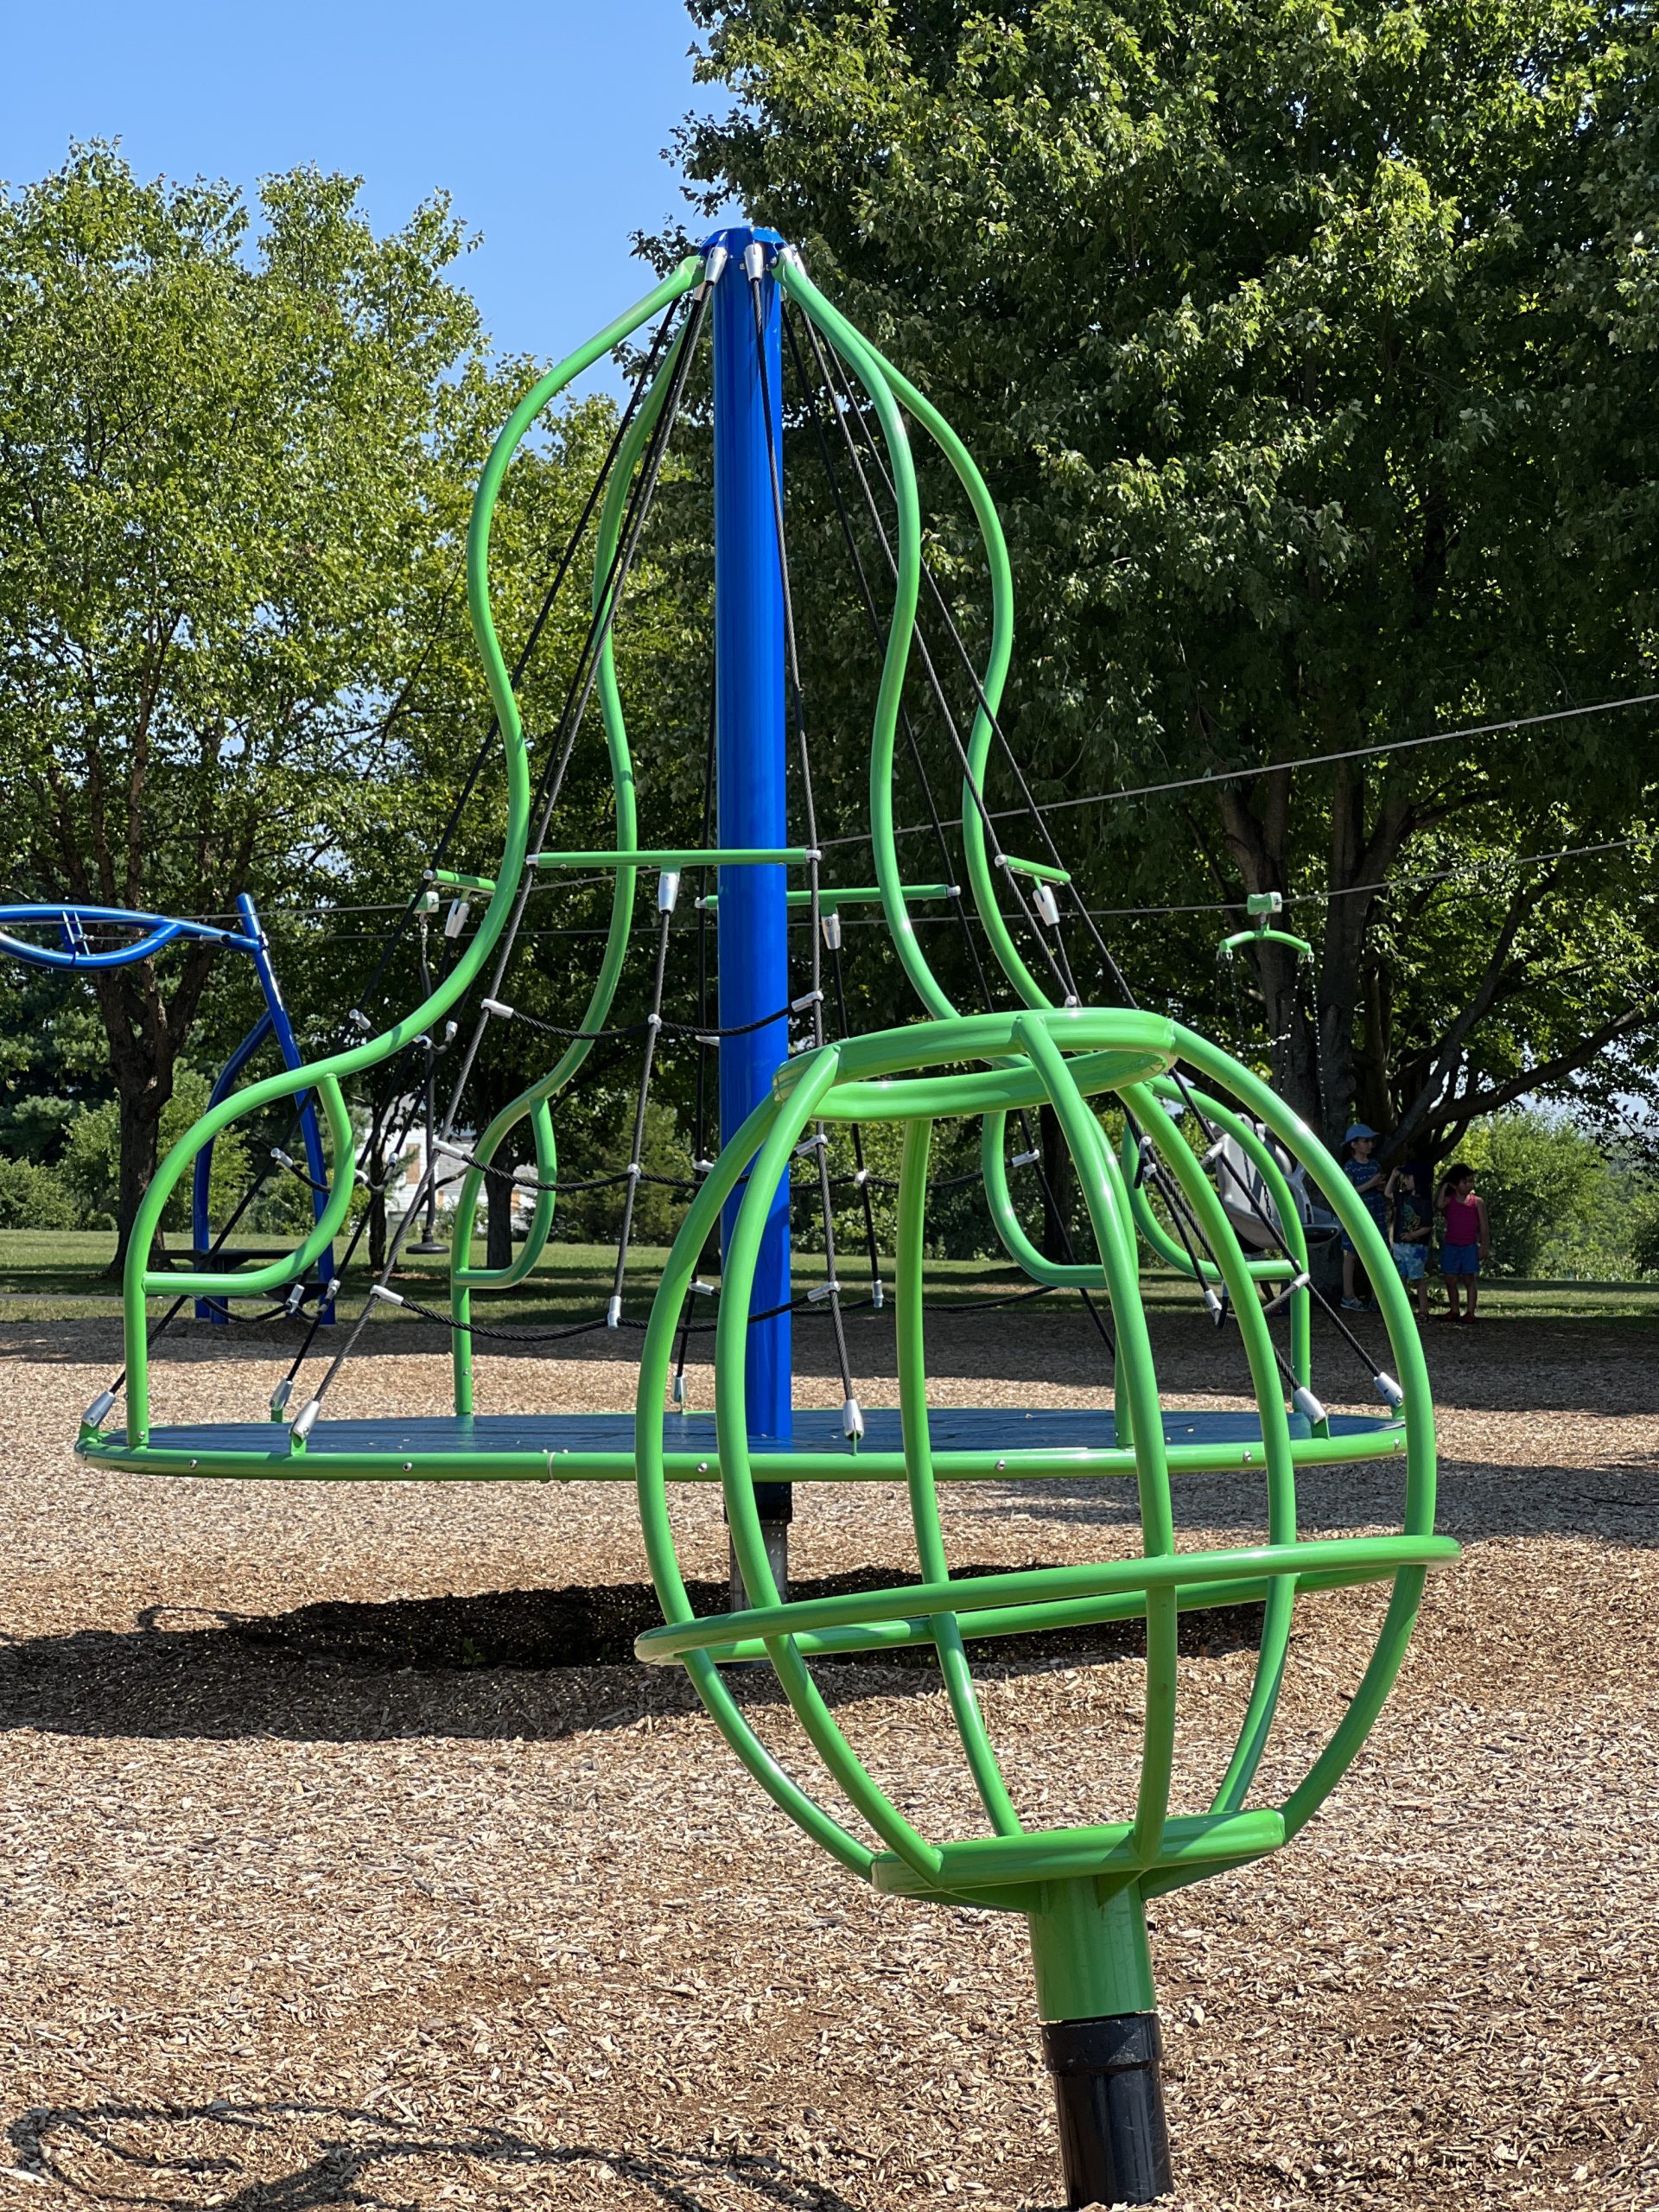 FEATURES - Spinners both tall At Heritage Park Playground in Asbury NJ